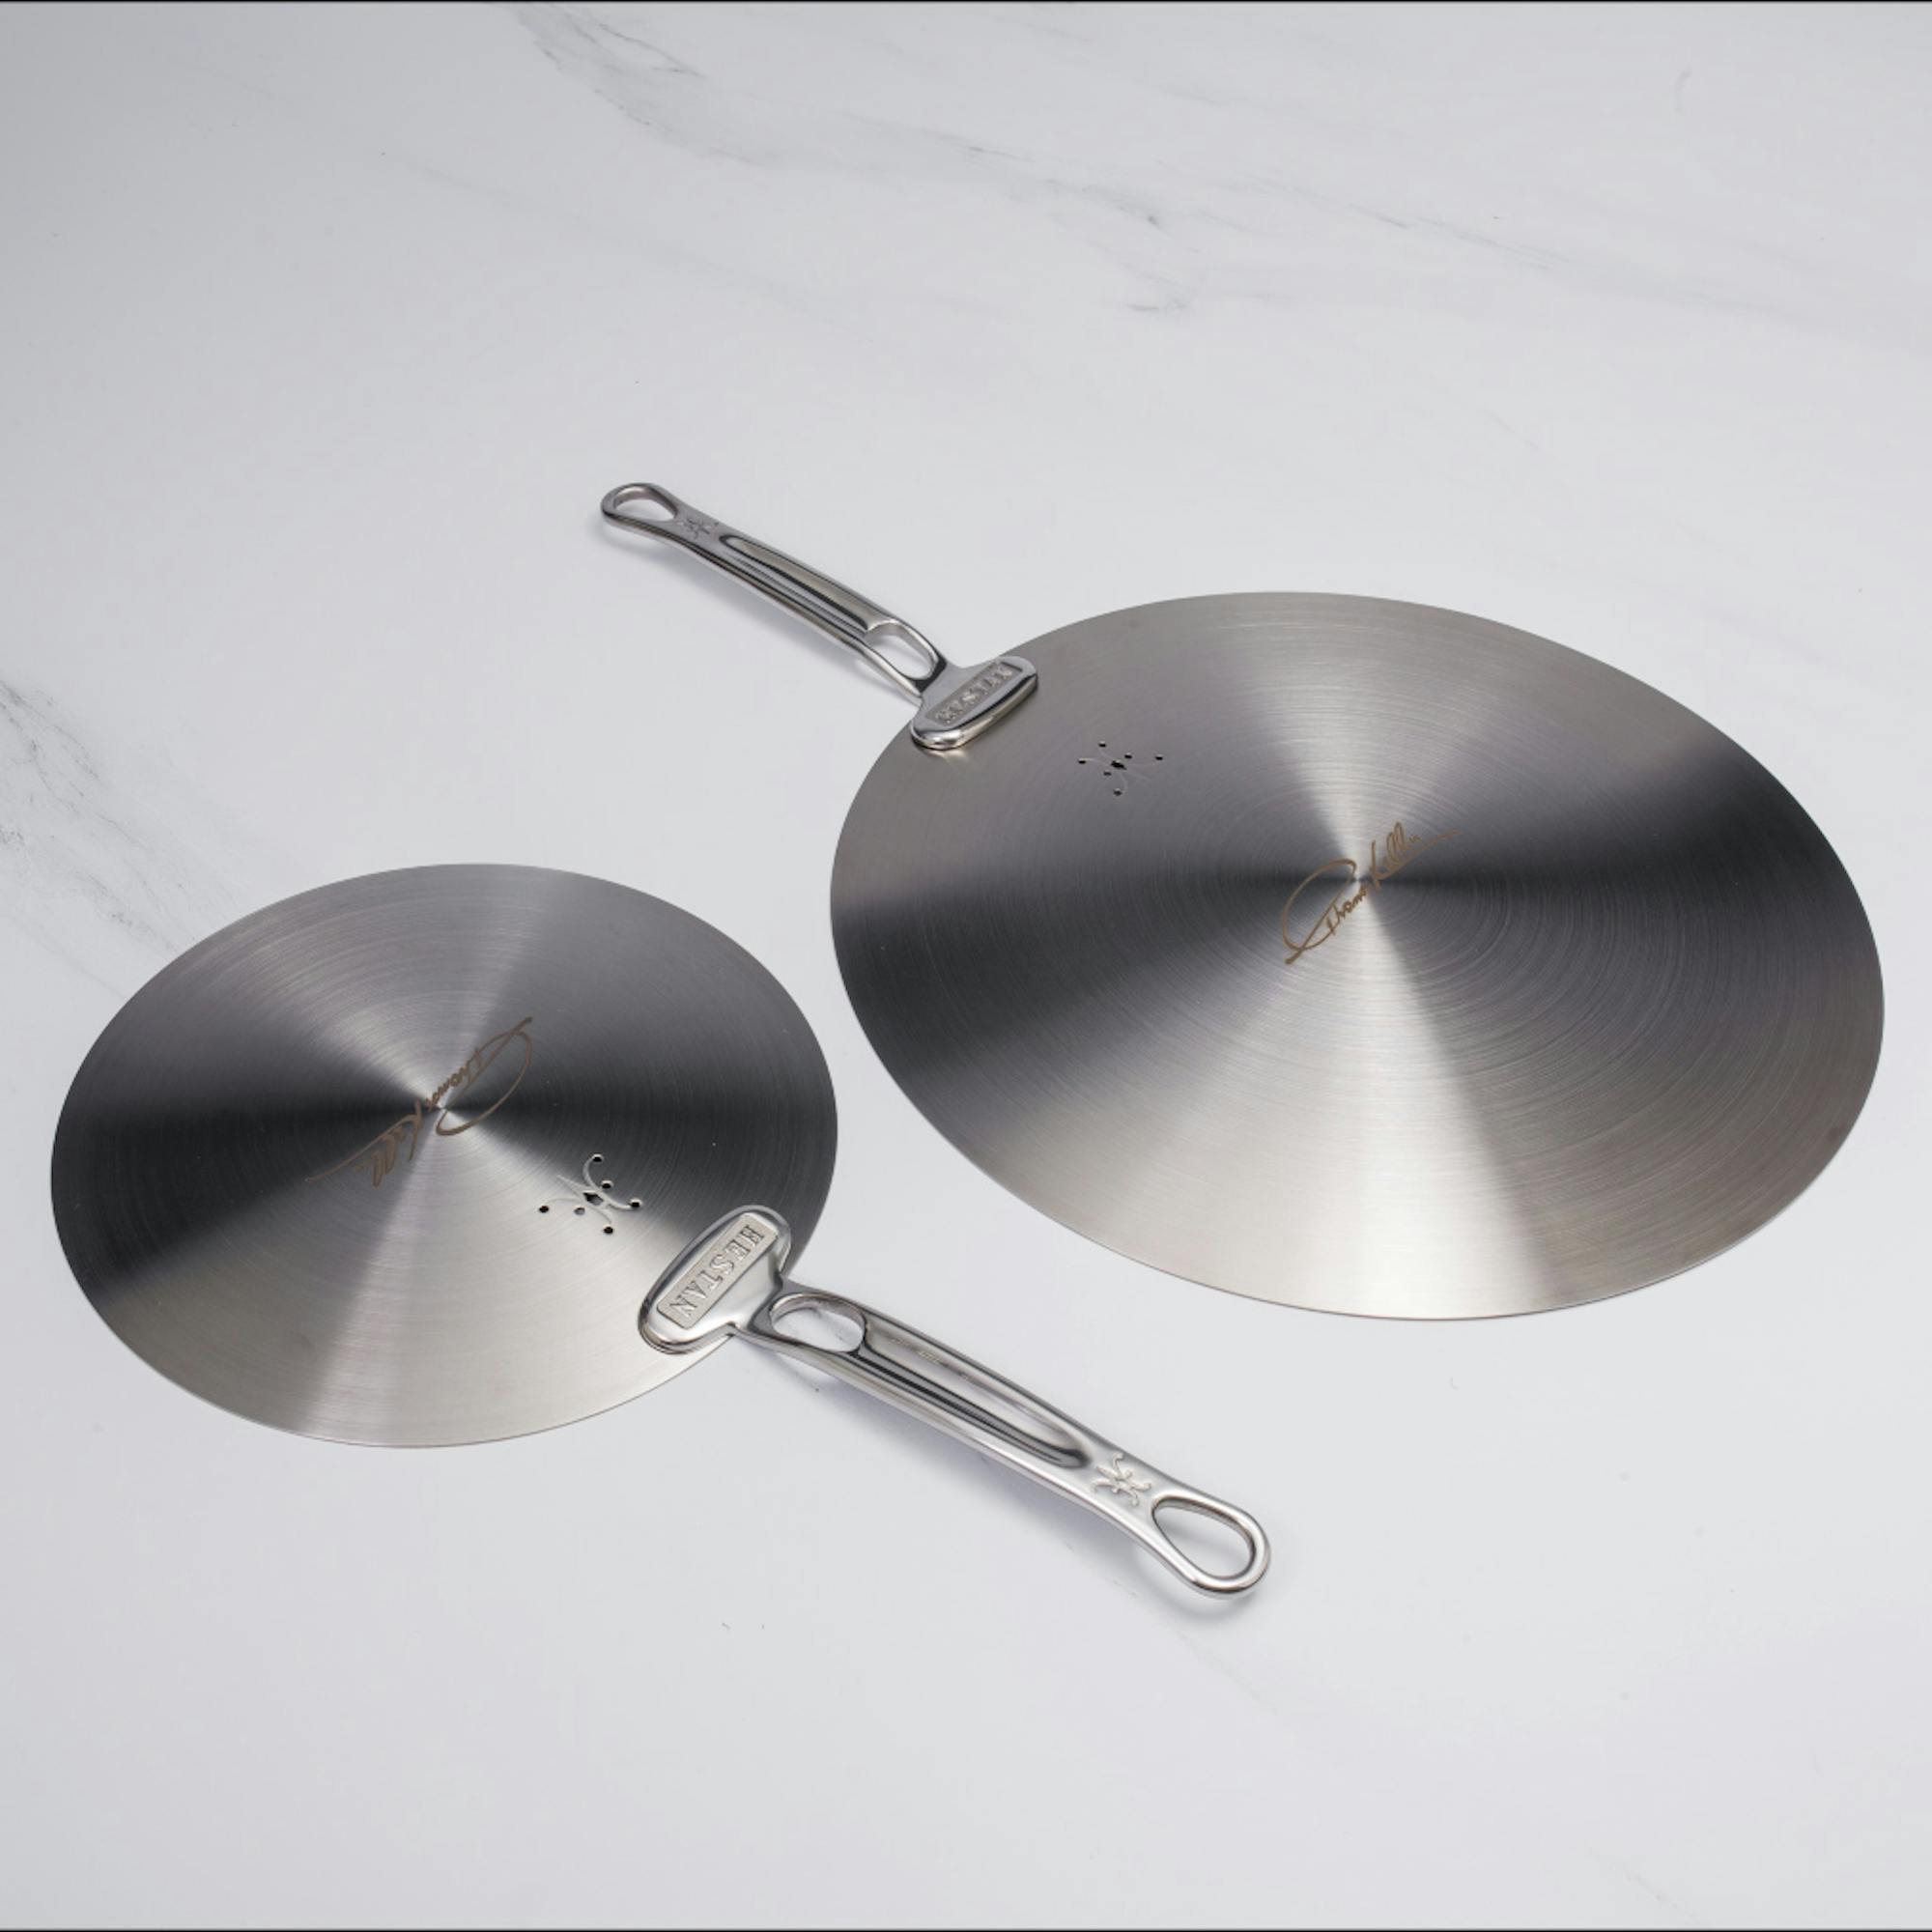 Thomas Keller Insignia Commercial Clad Stainless Steel Universal